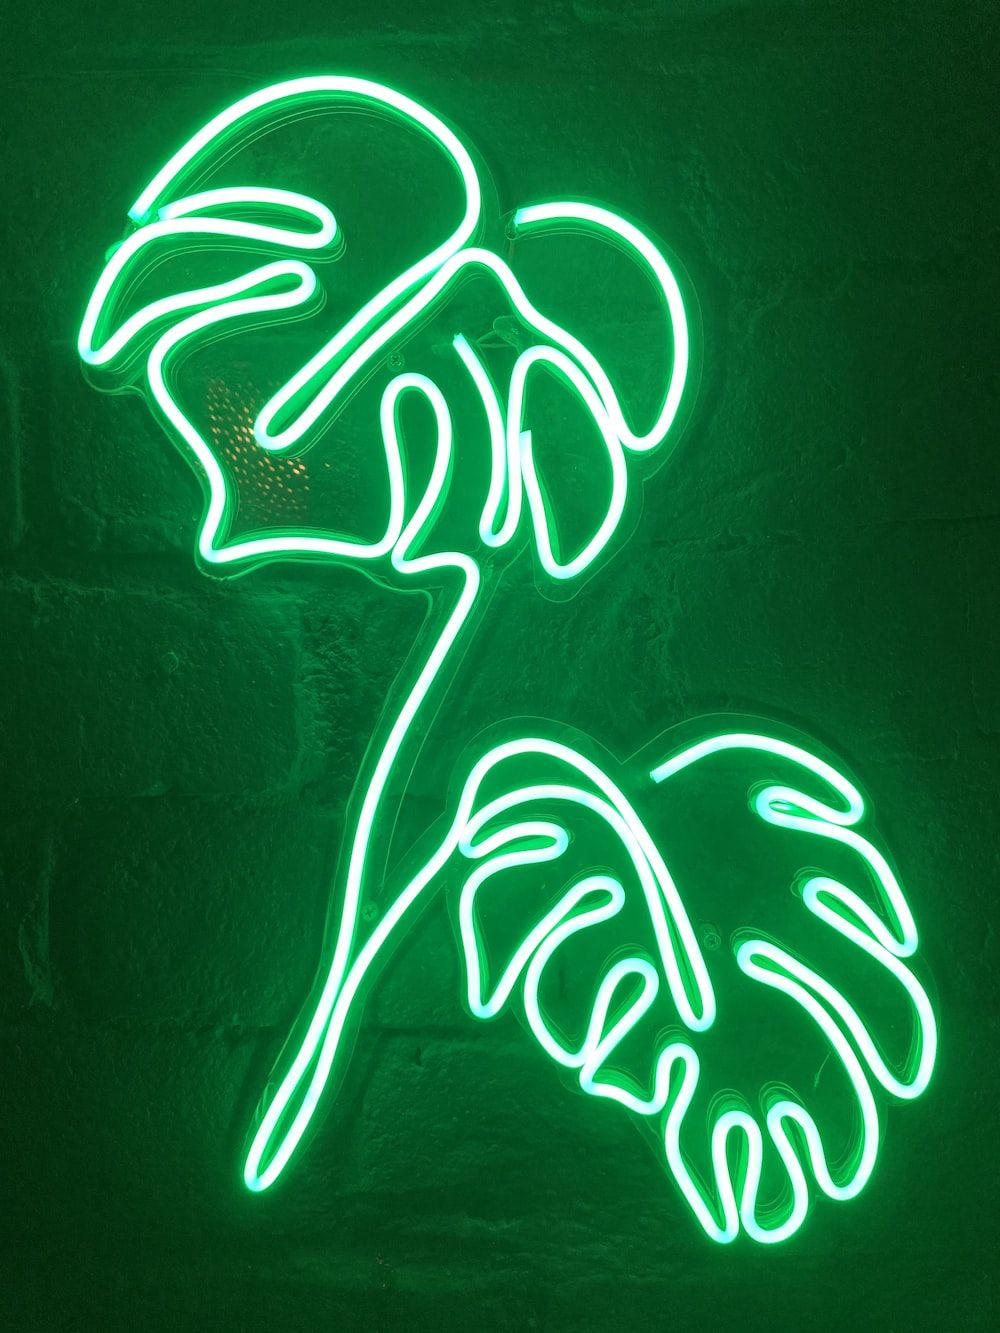 A neon sign of a leaf against a green wall - Neon green